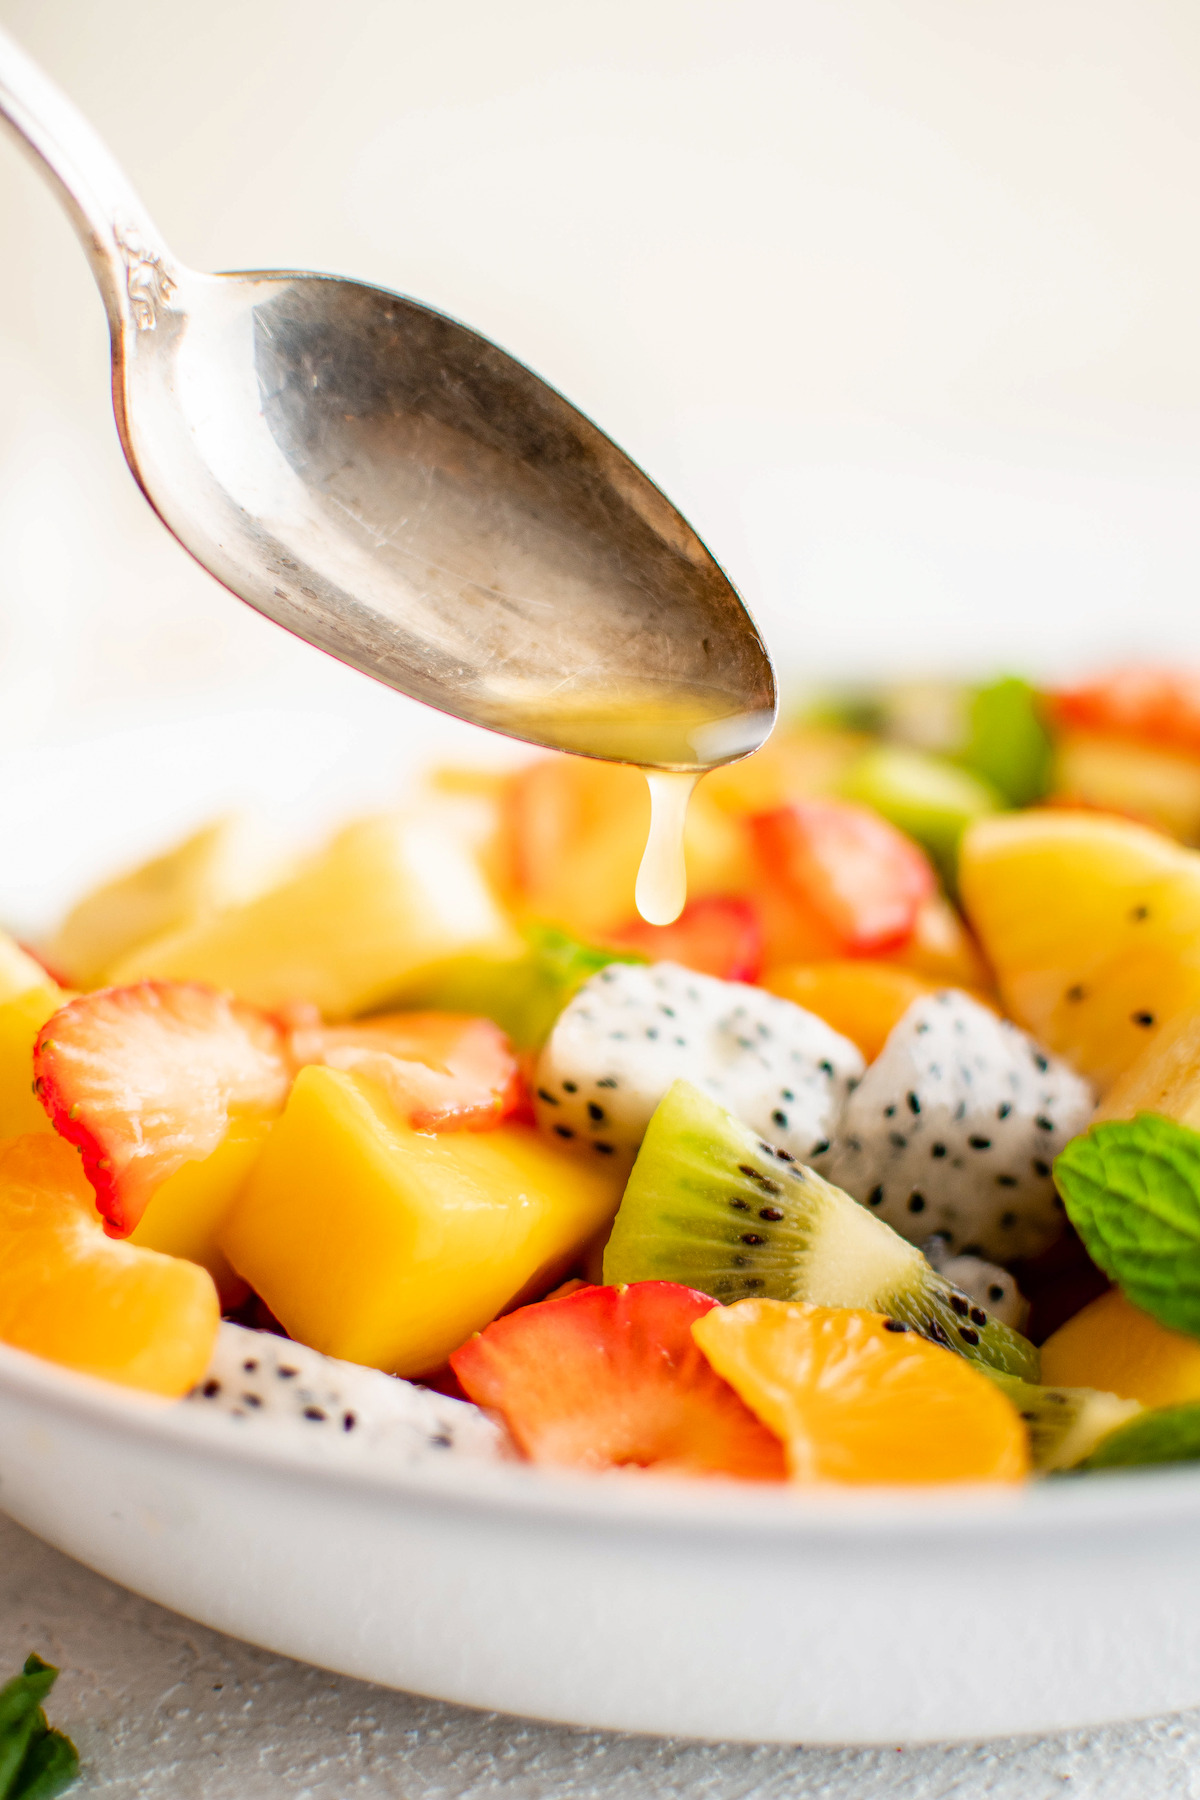 Spooning dressing over a bowl of mixed fresh fruit.